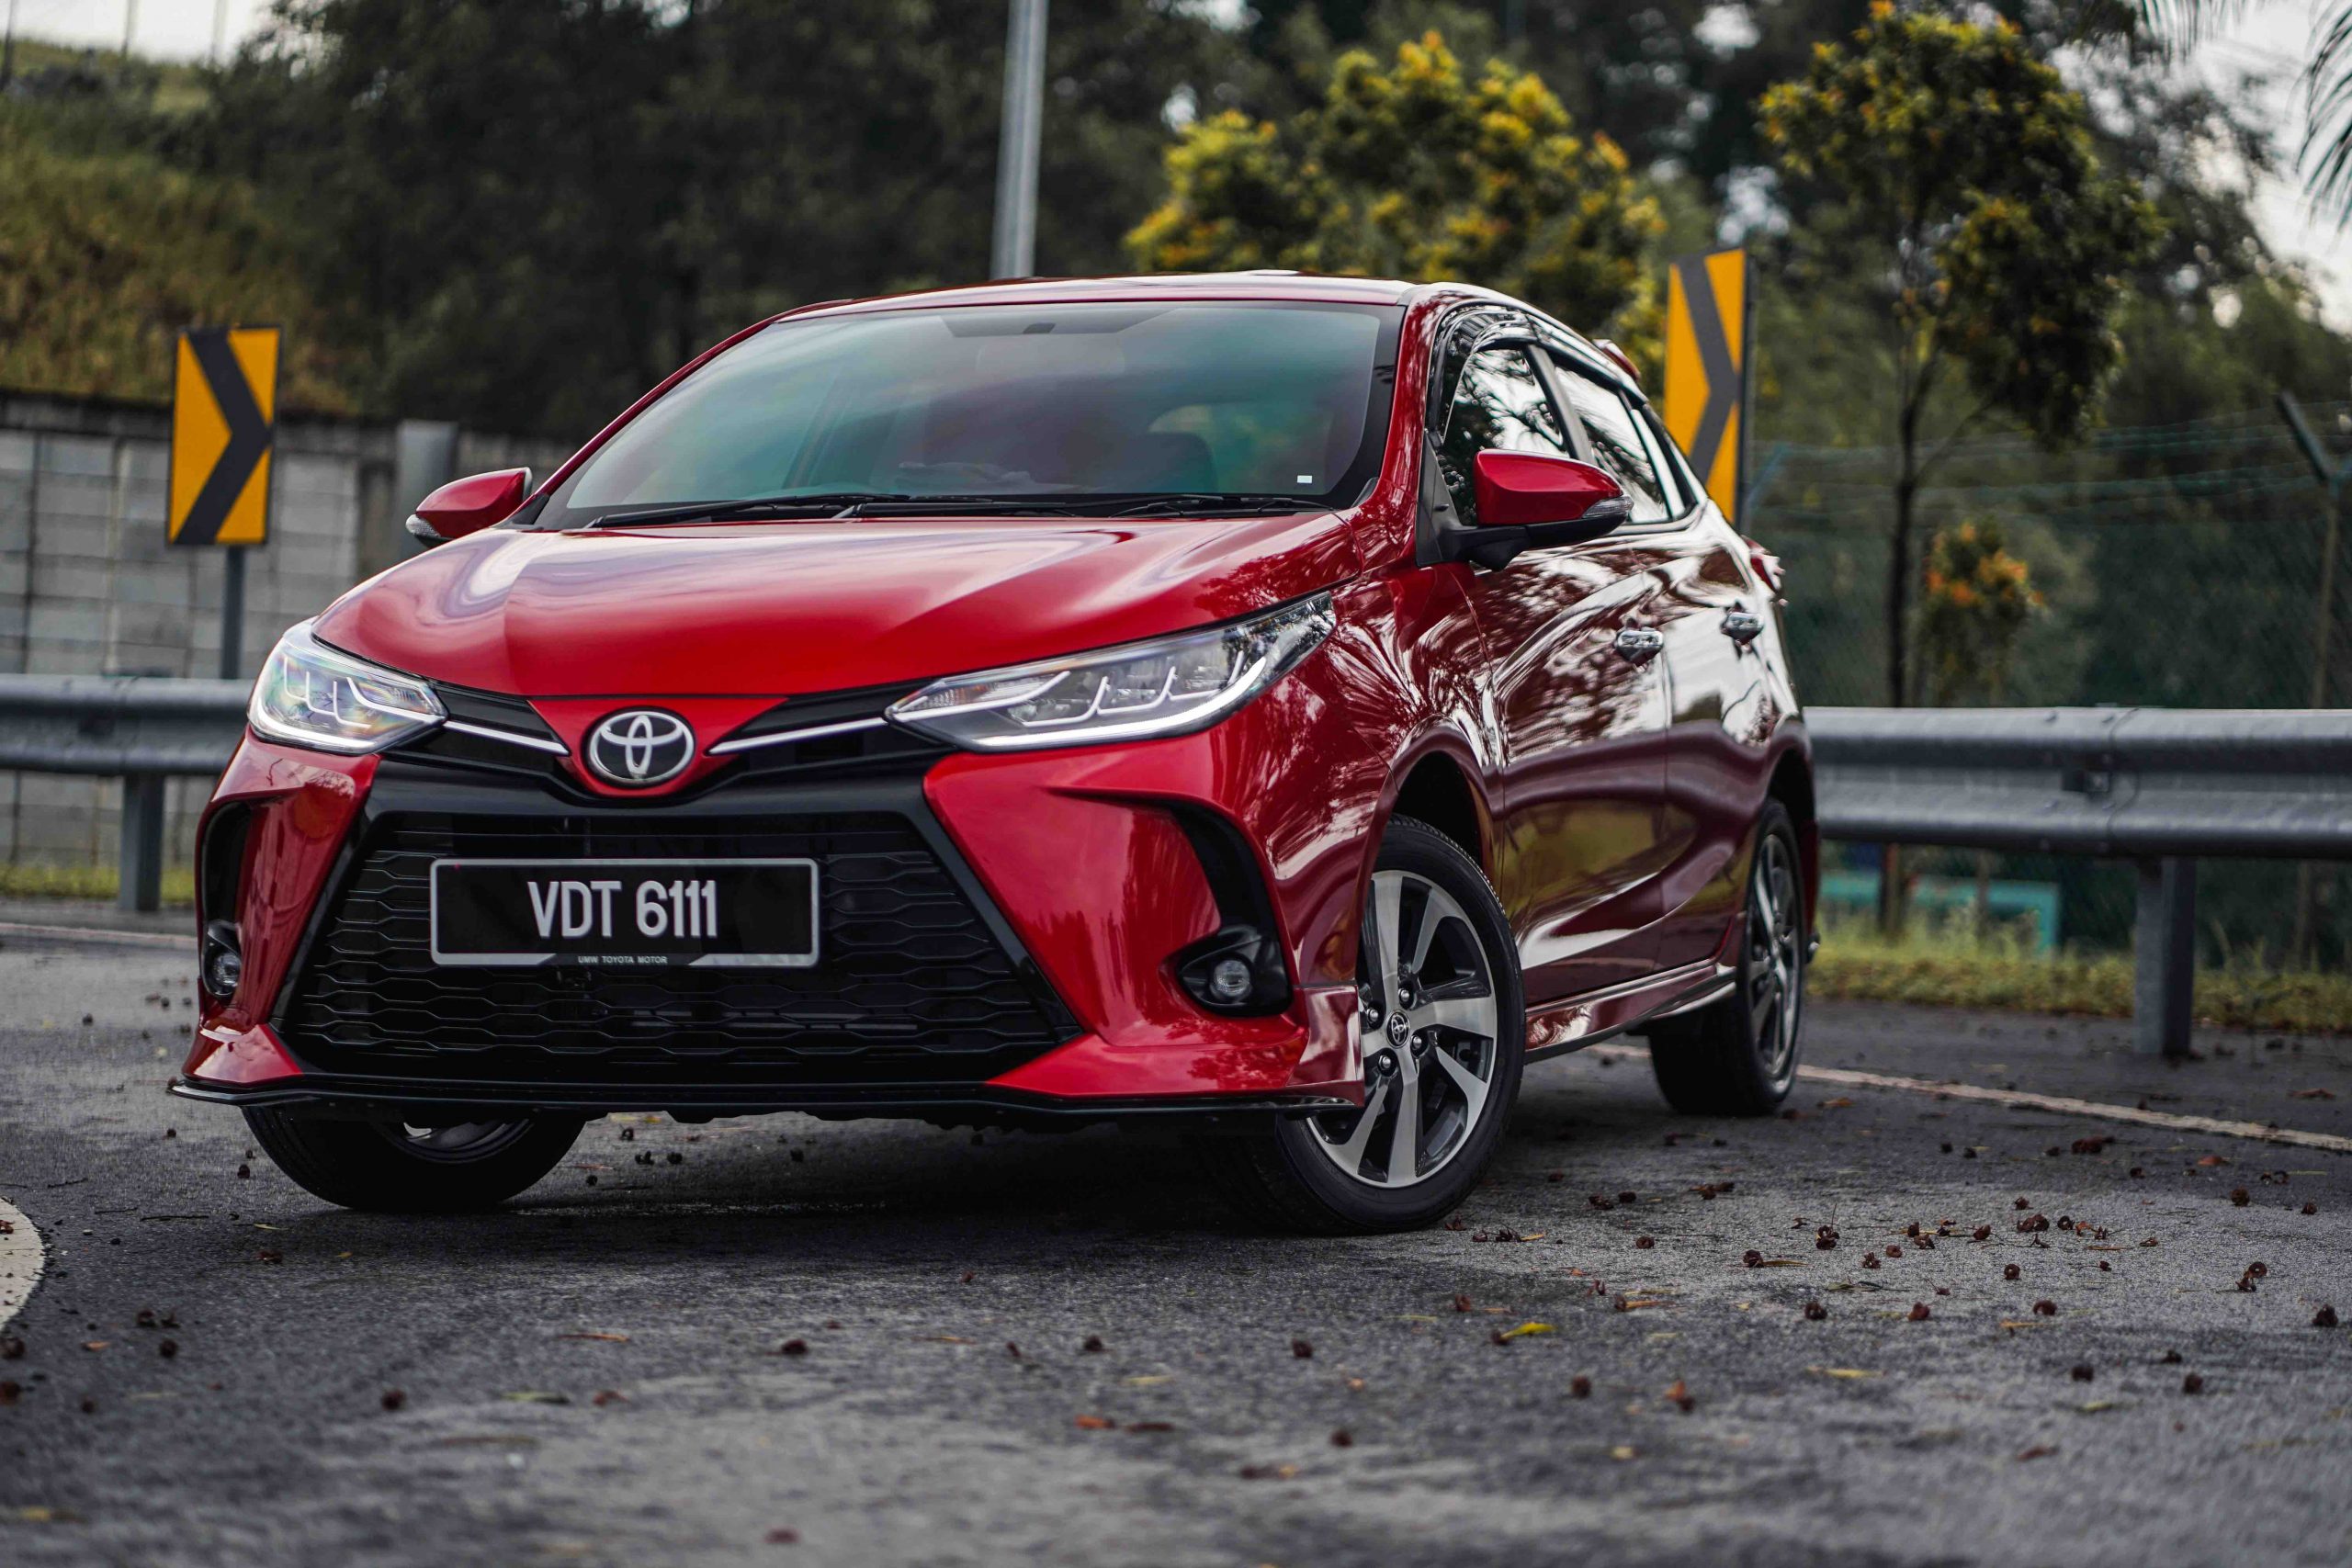 Toyota Yaris Facelift Launched In Malaysia, From RM 71k